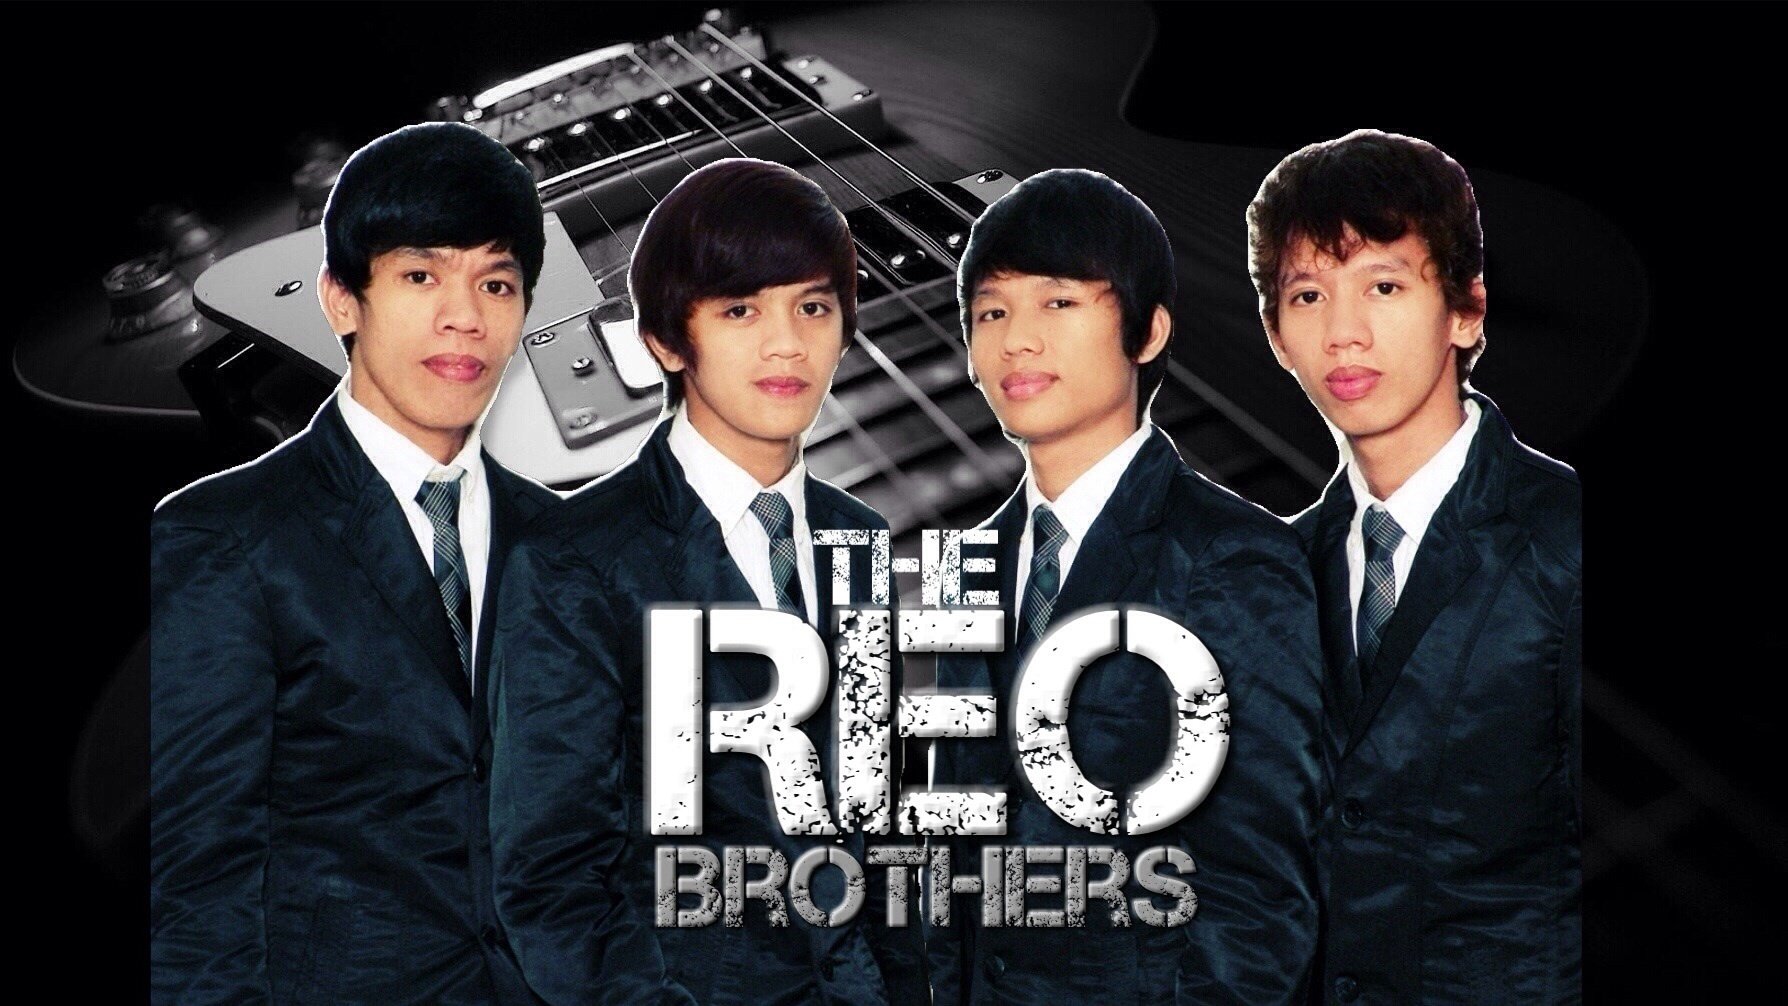 REO BROTHERS BAND ReverbNation